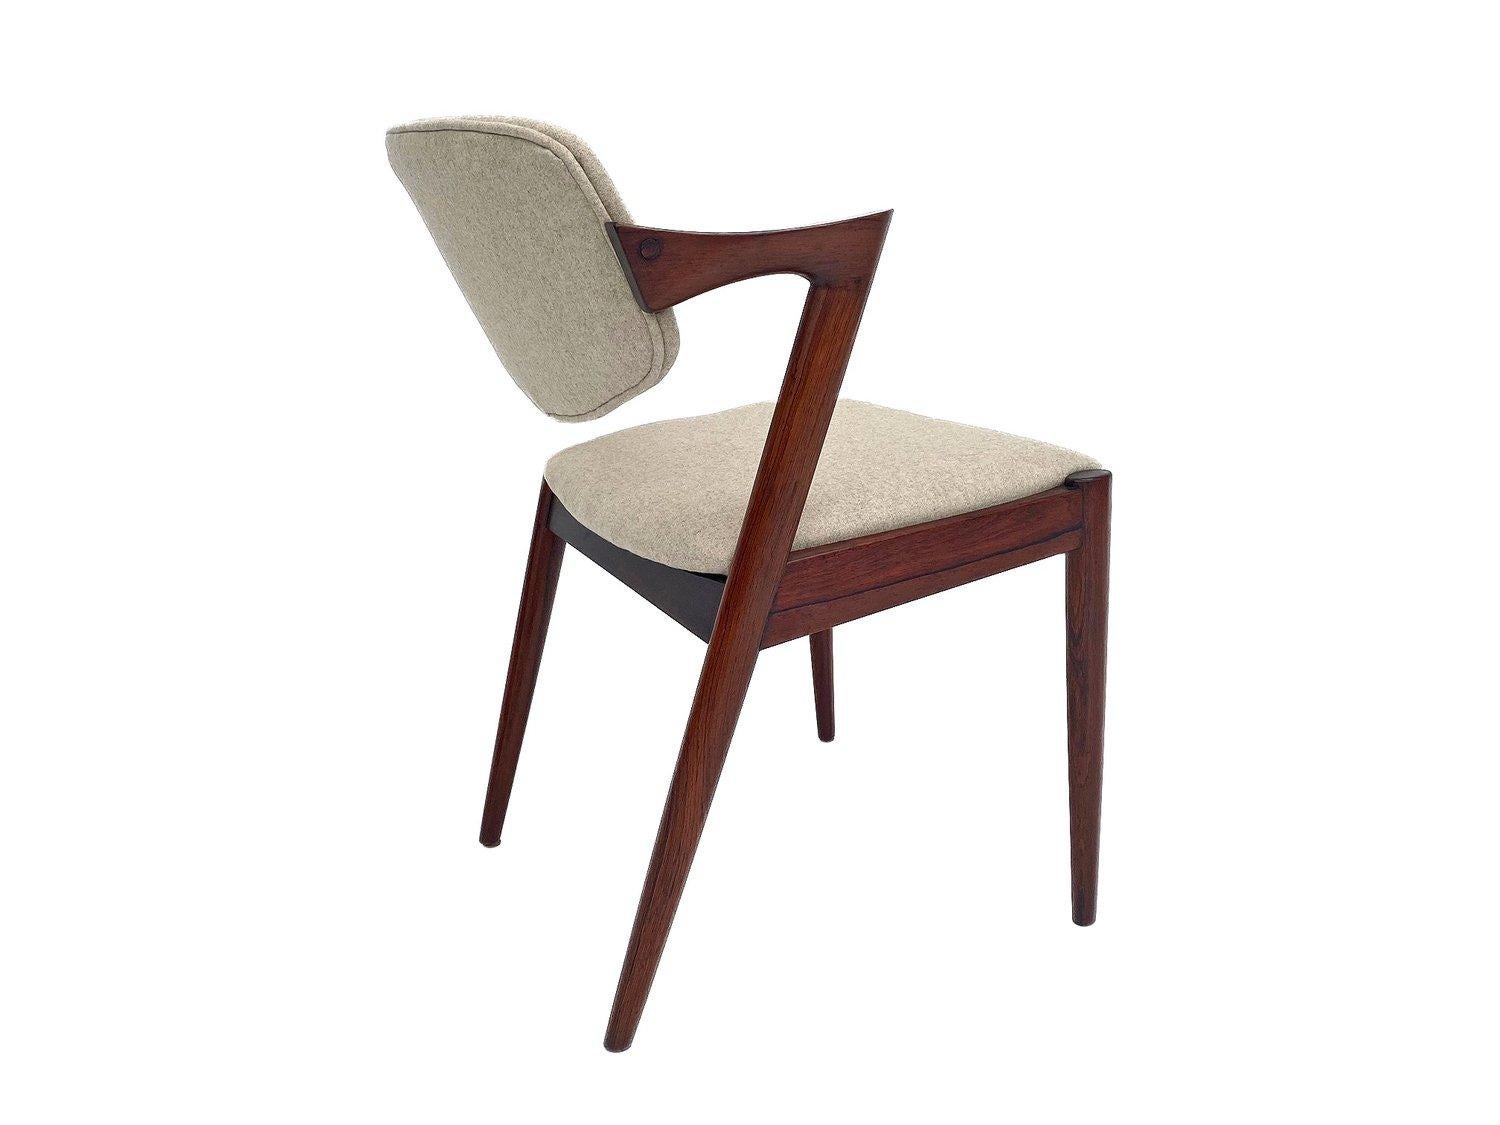 Polished Kai Kristiansen Model 42 Rosewood and Cream Wool Dining Chairs, Danish 1960s